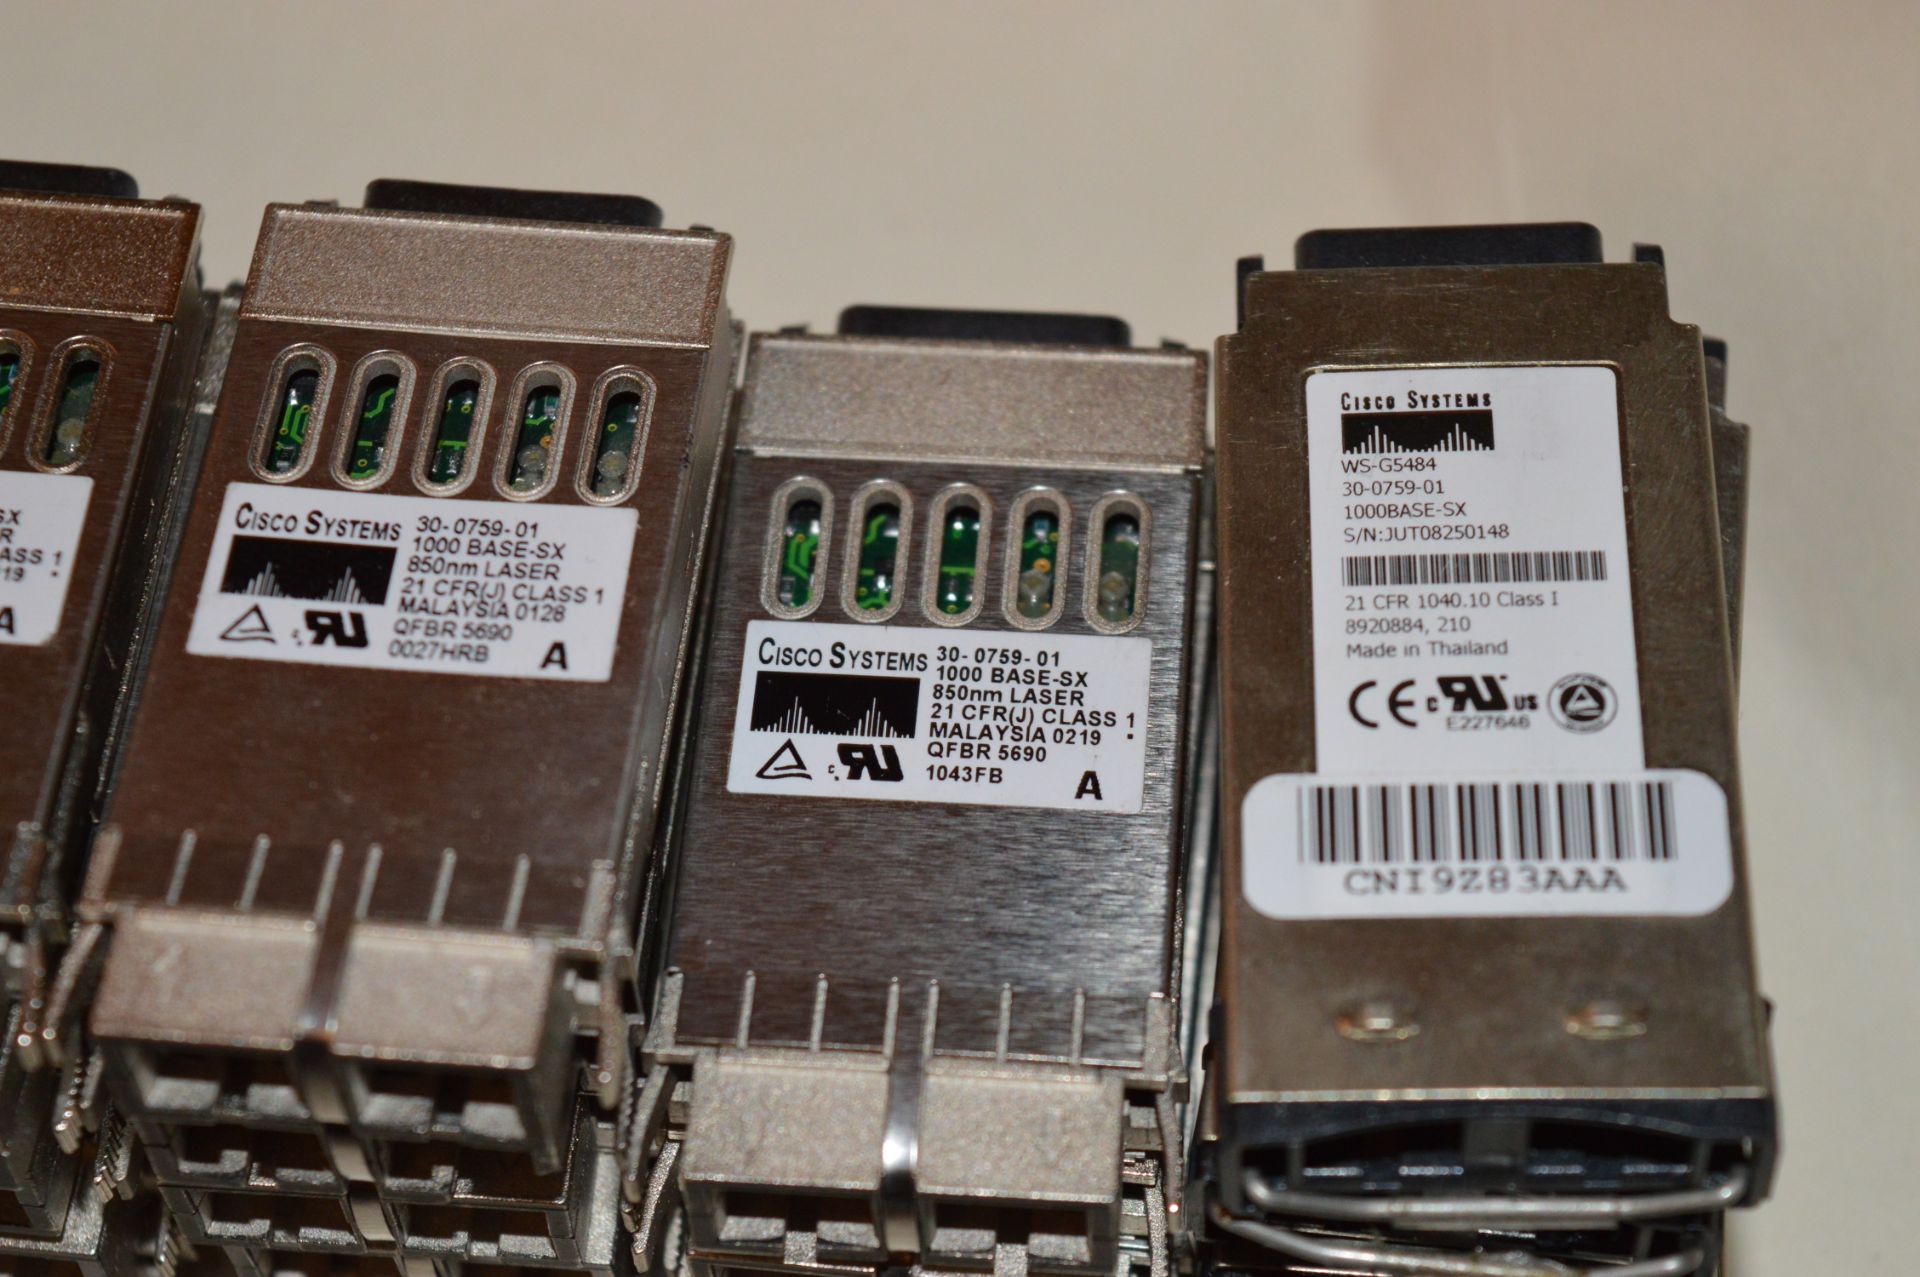 28 x Cisco Systems GBIC Transceivers - Mainly Type 30-0759-01 - Some Others Also Included - - Image 2 of 4